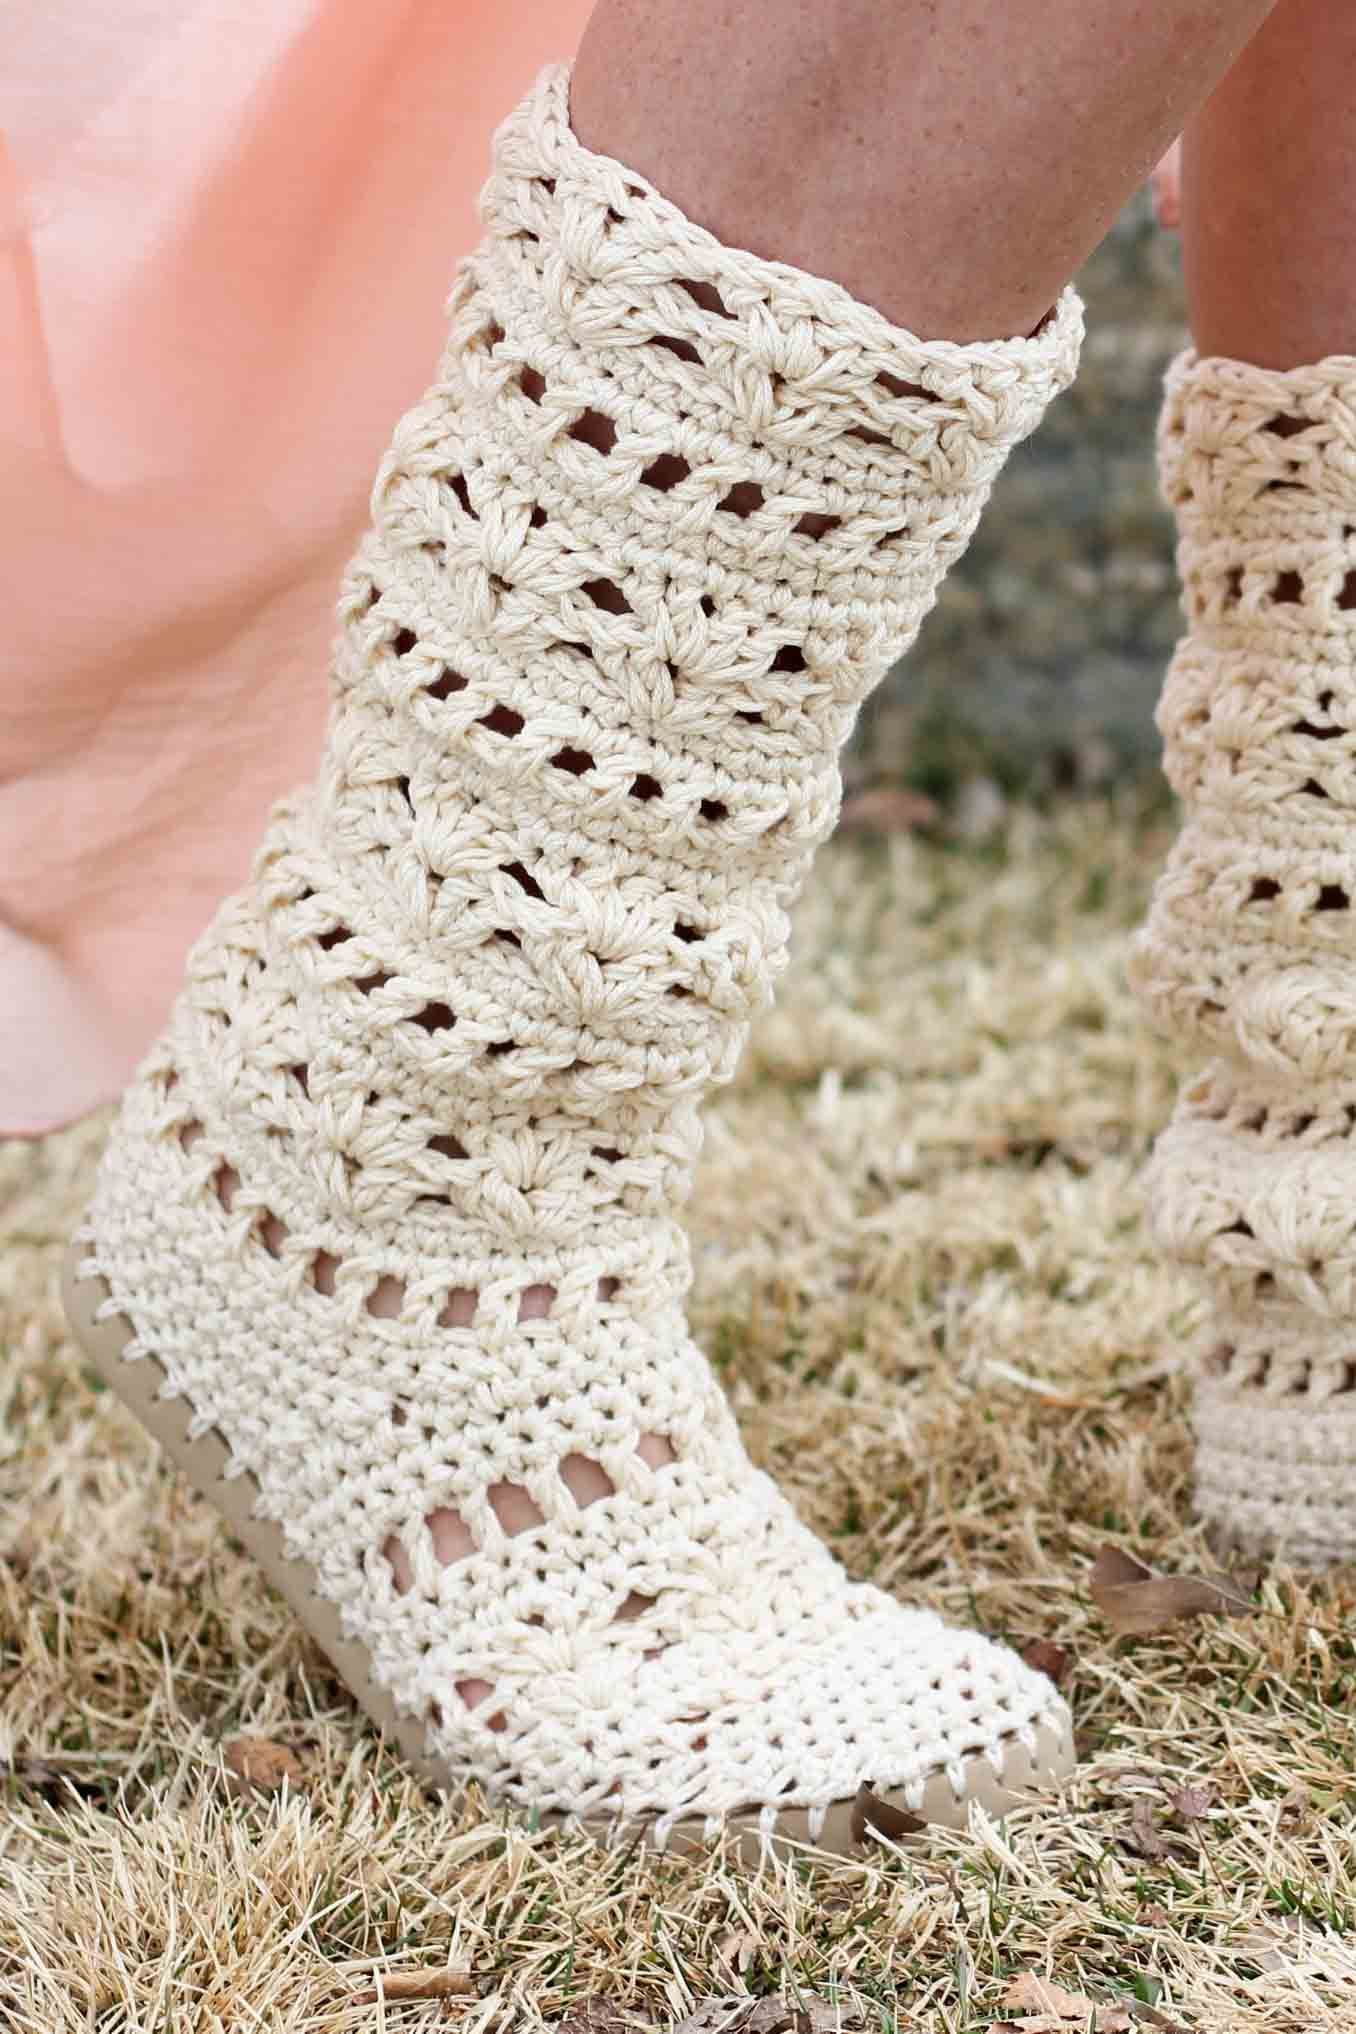 Whether youre headed to Coachella or your local concert in the park, this crochet boots pattern for adults will complete your